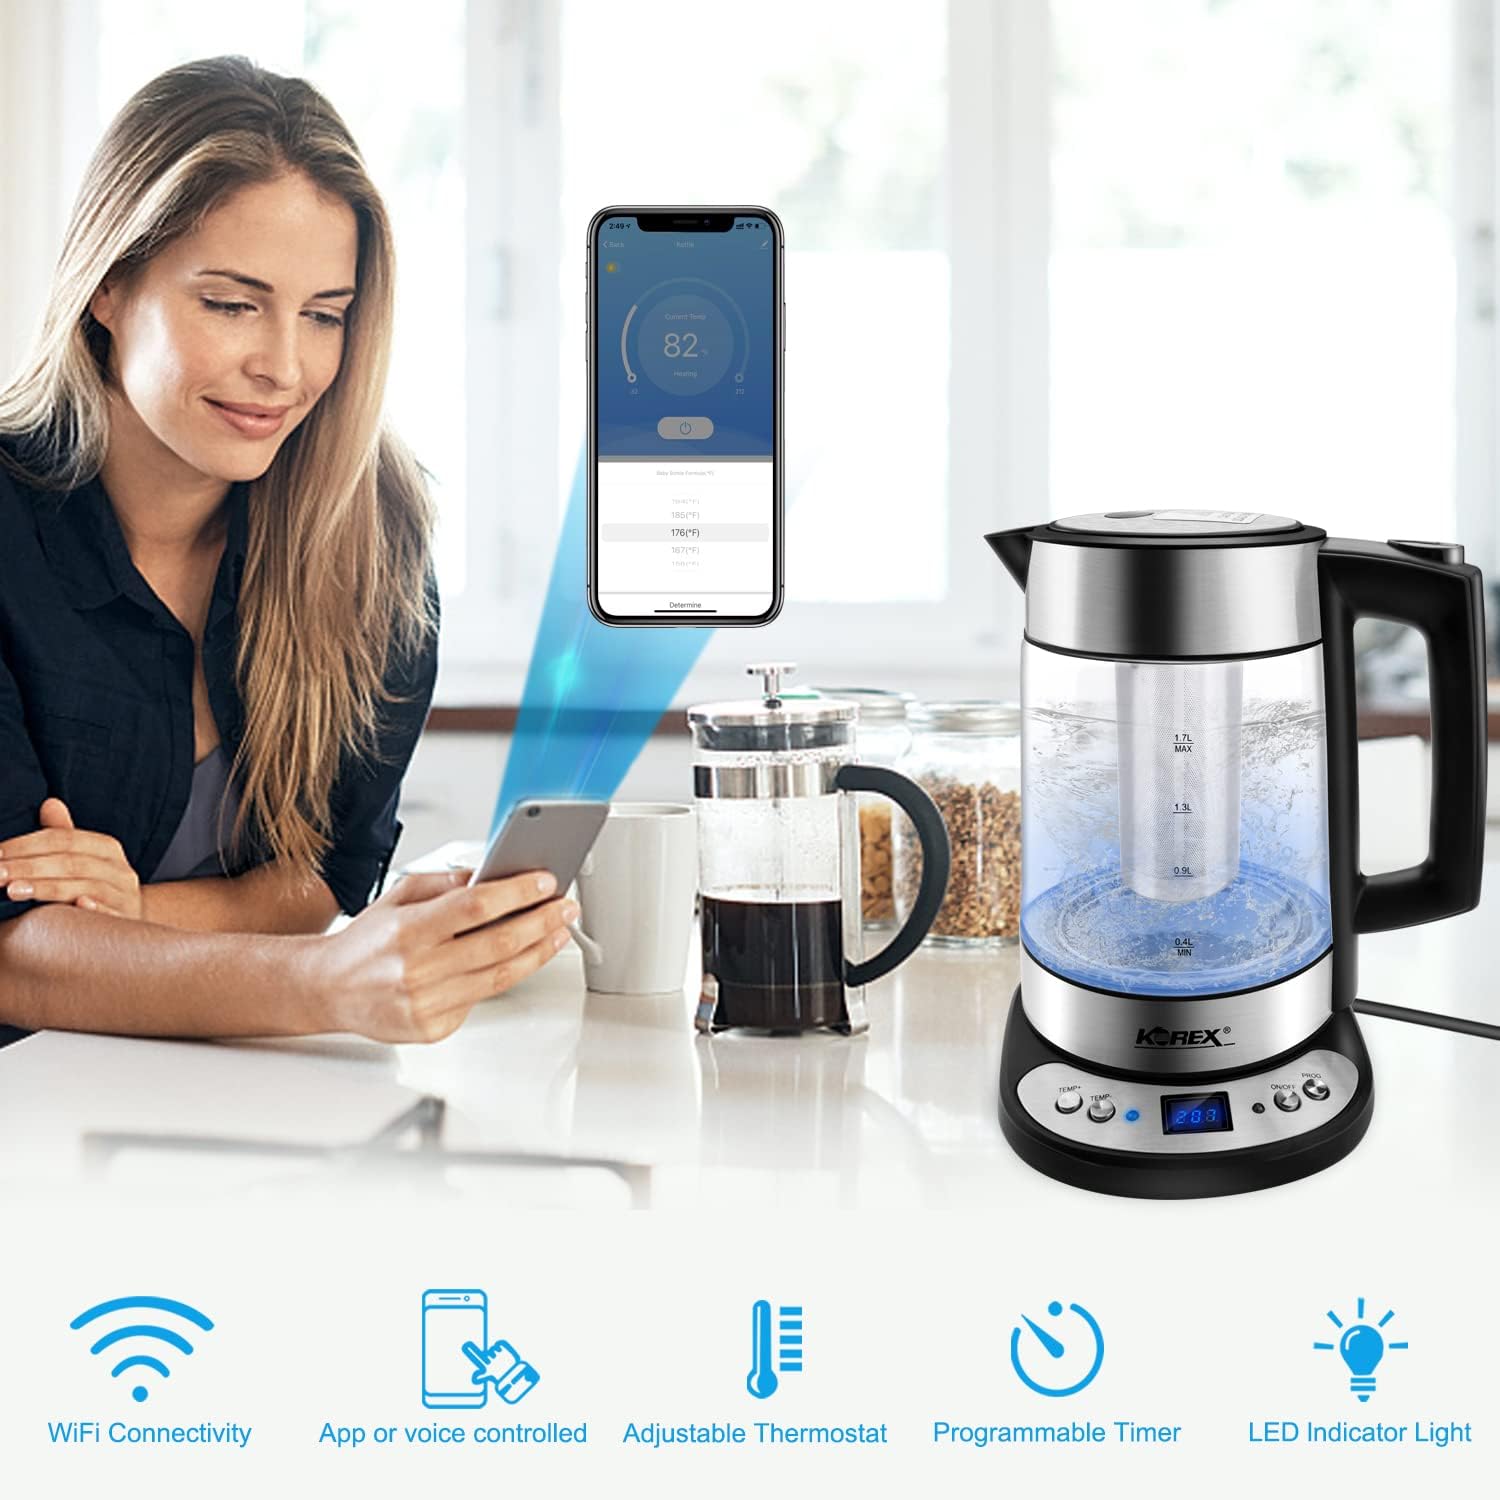 Smart Electric Kettle APP Control, Korex Glass Water Boiler Included Filter Suitable for Alexa Google Home Assistant 1.7 L BPA FREE Great for Coffee Tea Milk With Overheat Protection Controlled by Smartphone